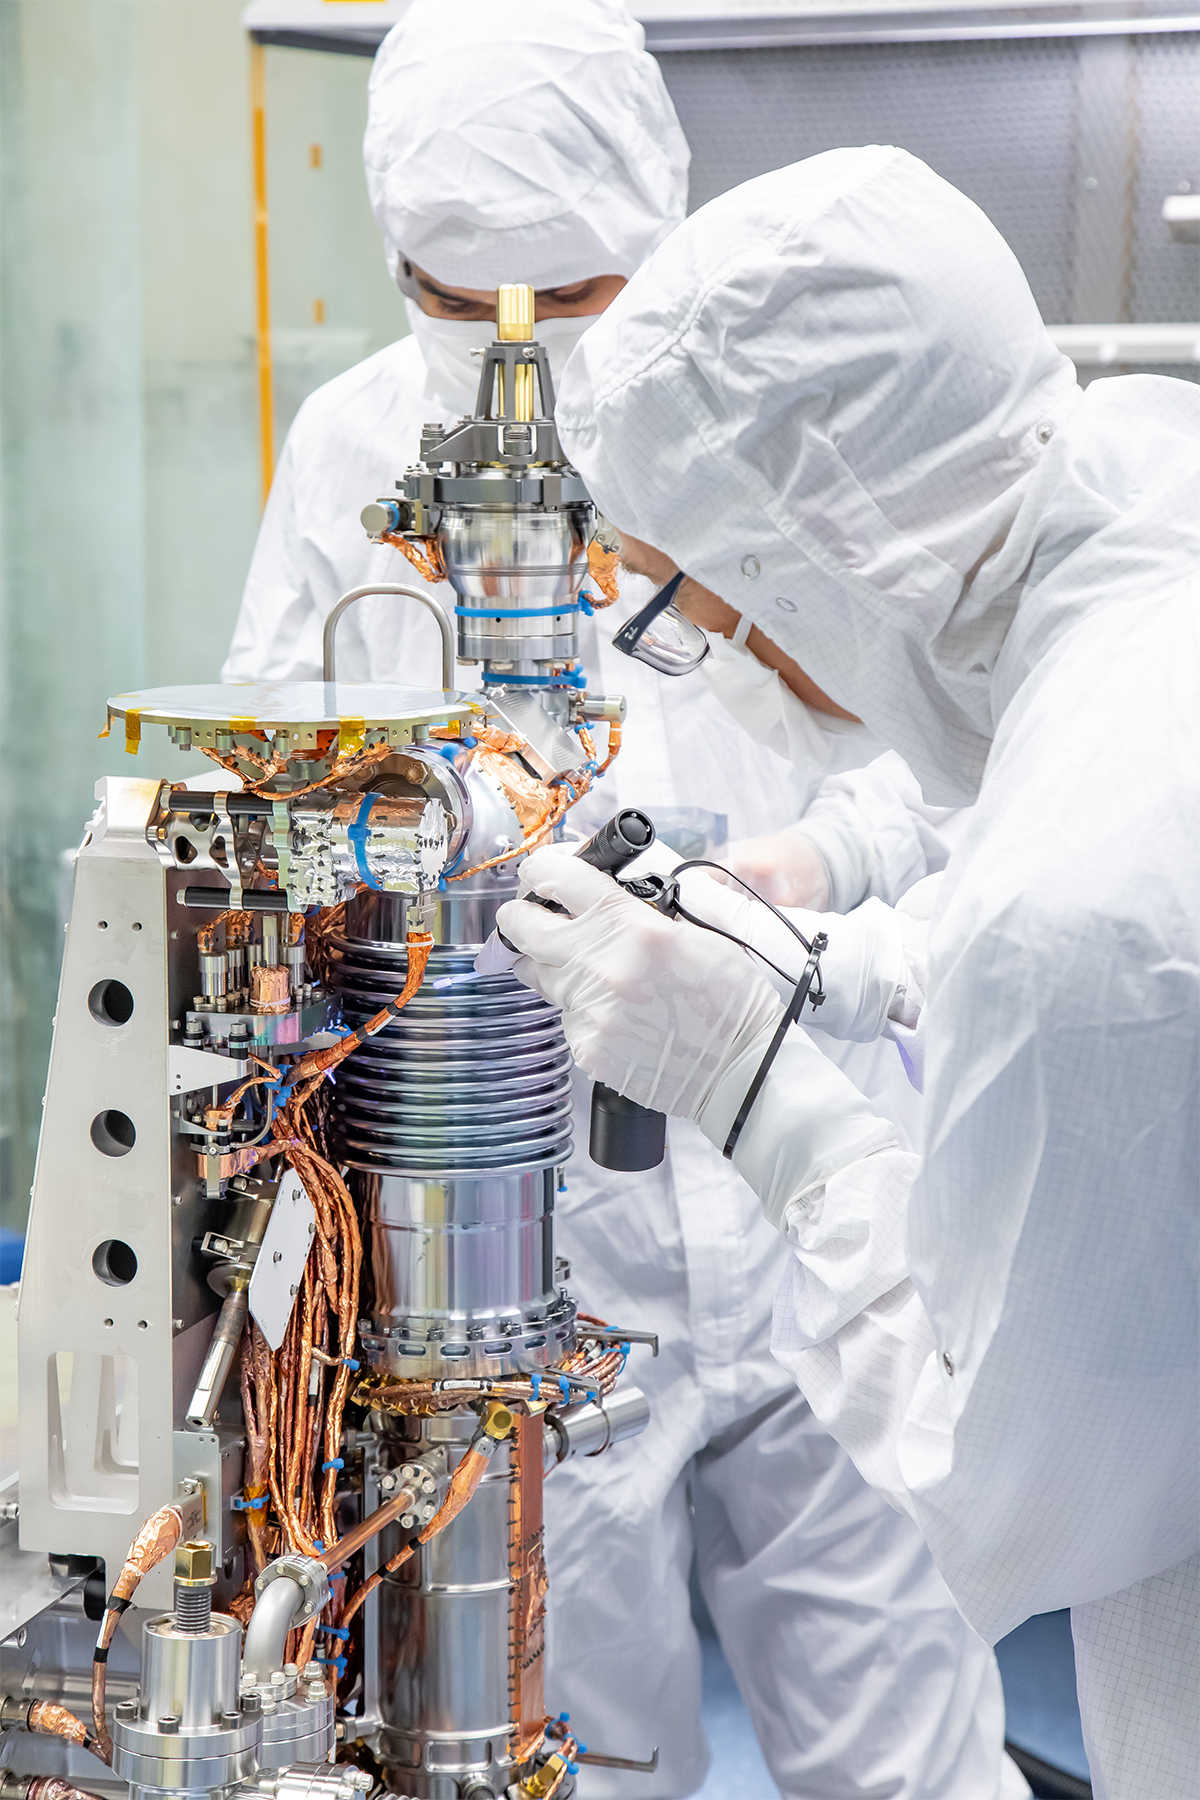 Two individuals in protective suits working on the mass spectrometer